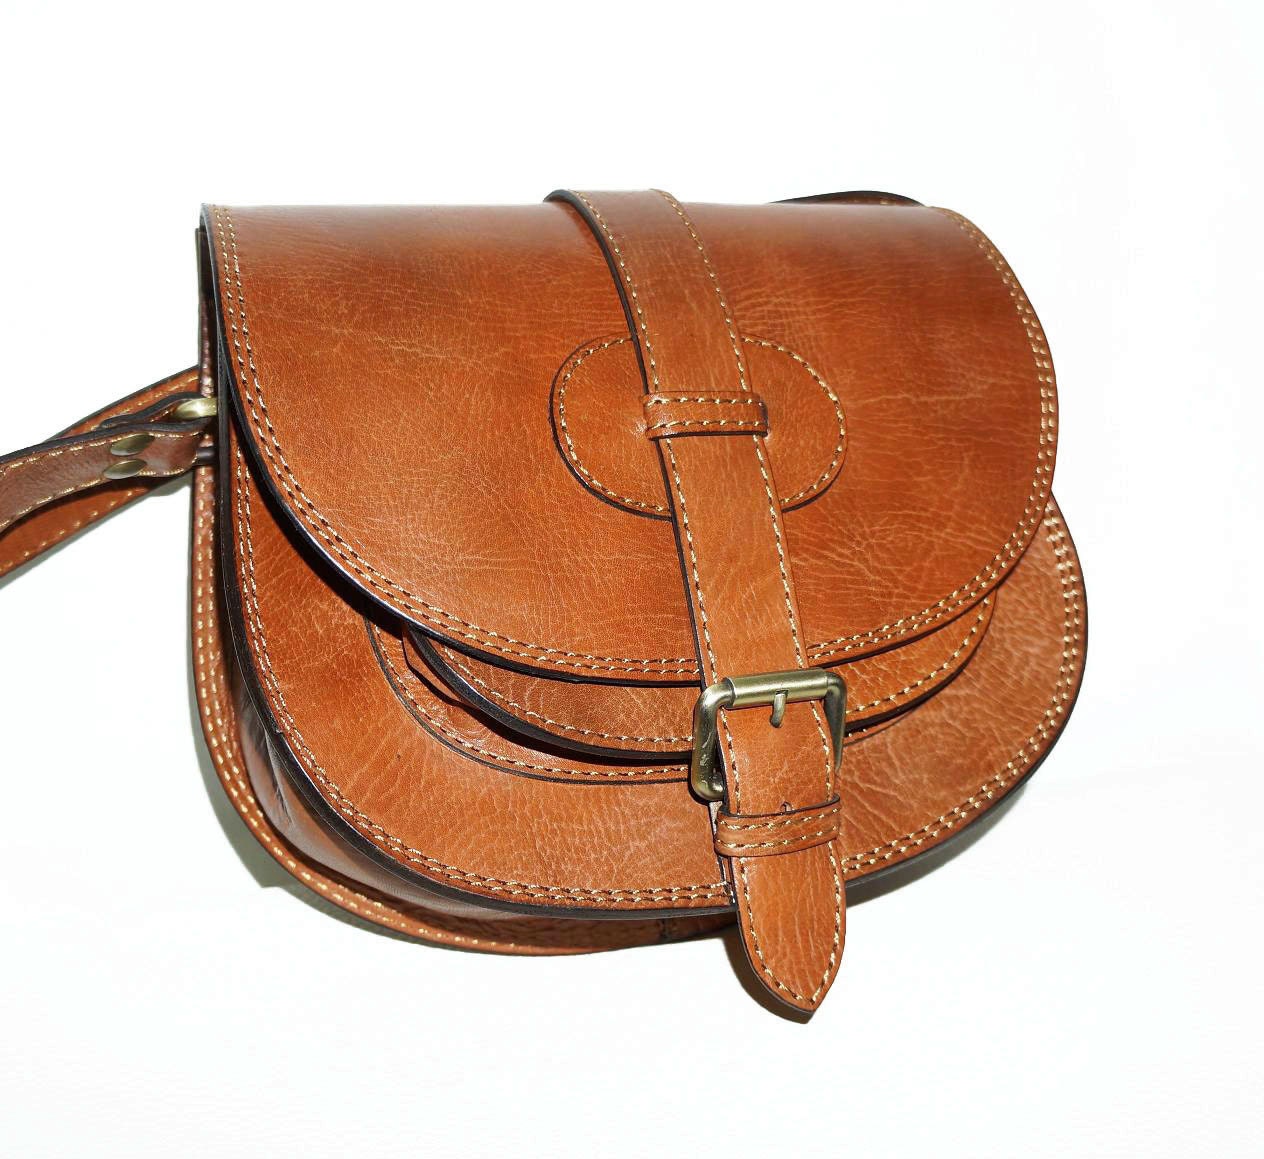 Goldmann S // Leather Saddle Bag // Cross body bag by ChicLeather